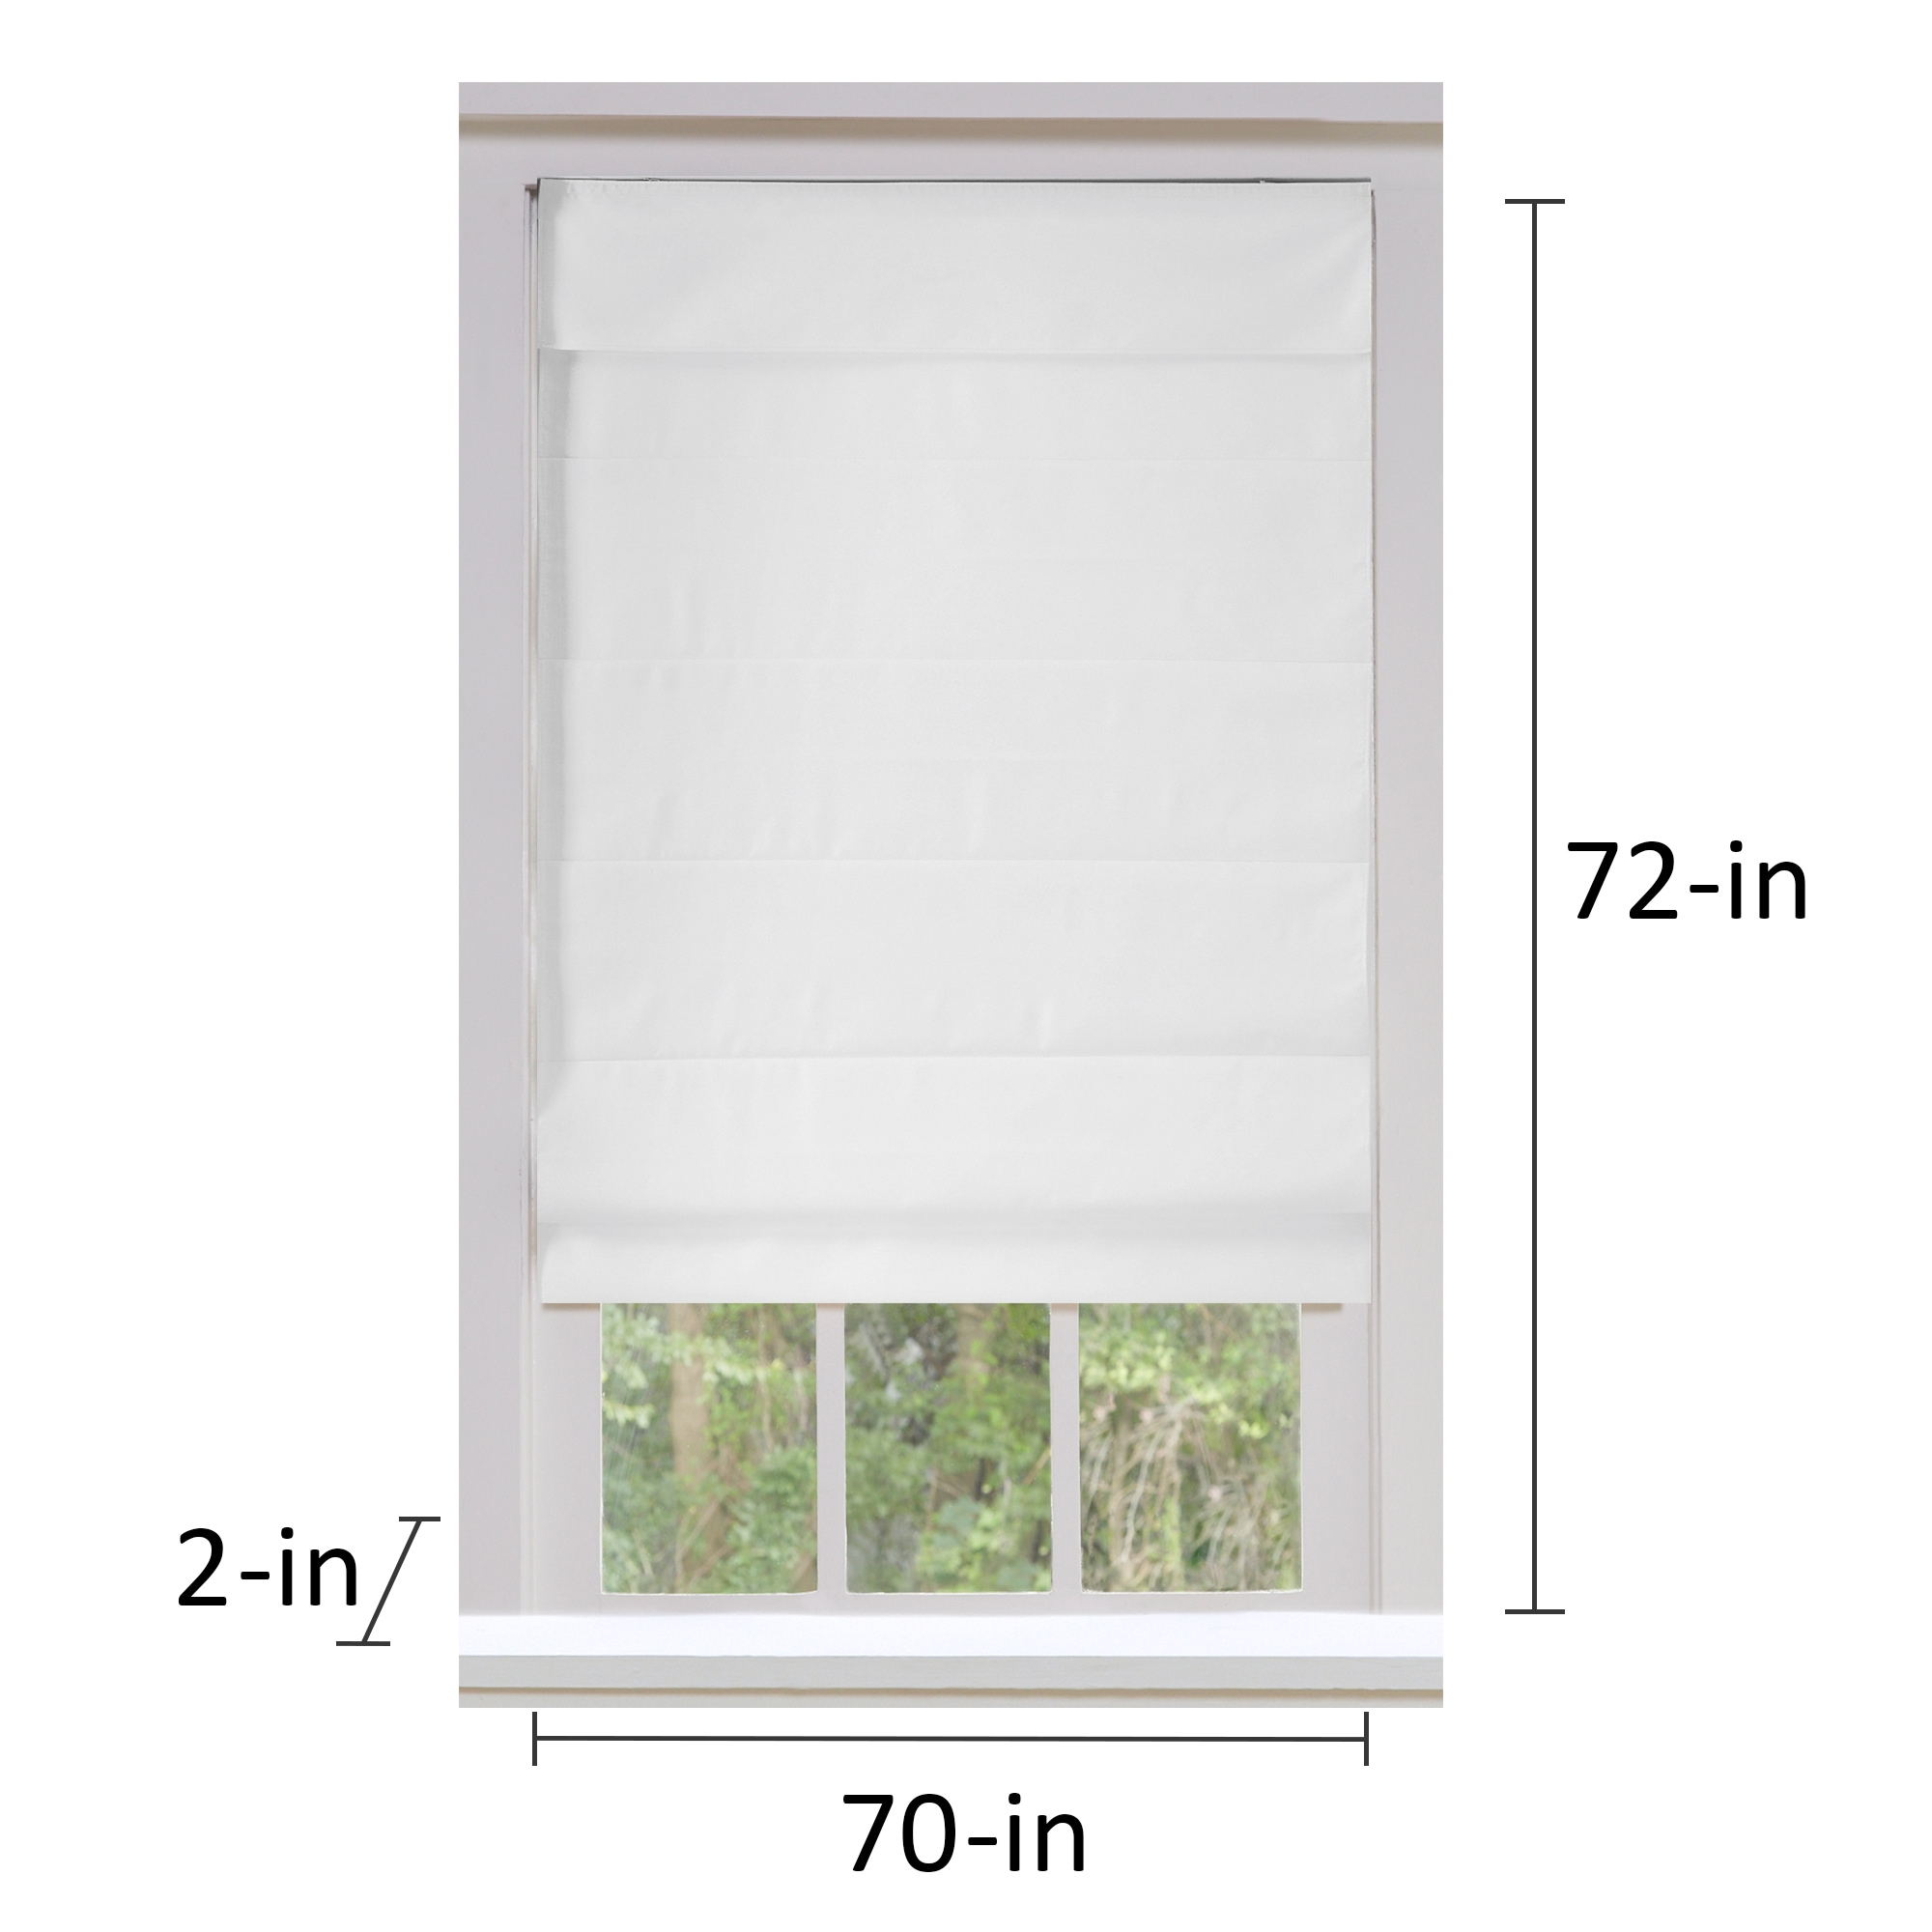 Calyx Interiors Cordless Lift Fabric Roman Shades in Size 30.5-Inch Width x 72-Inch Height Color Blackout Grey